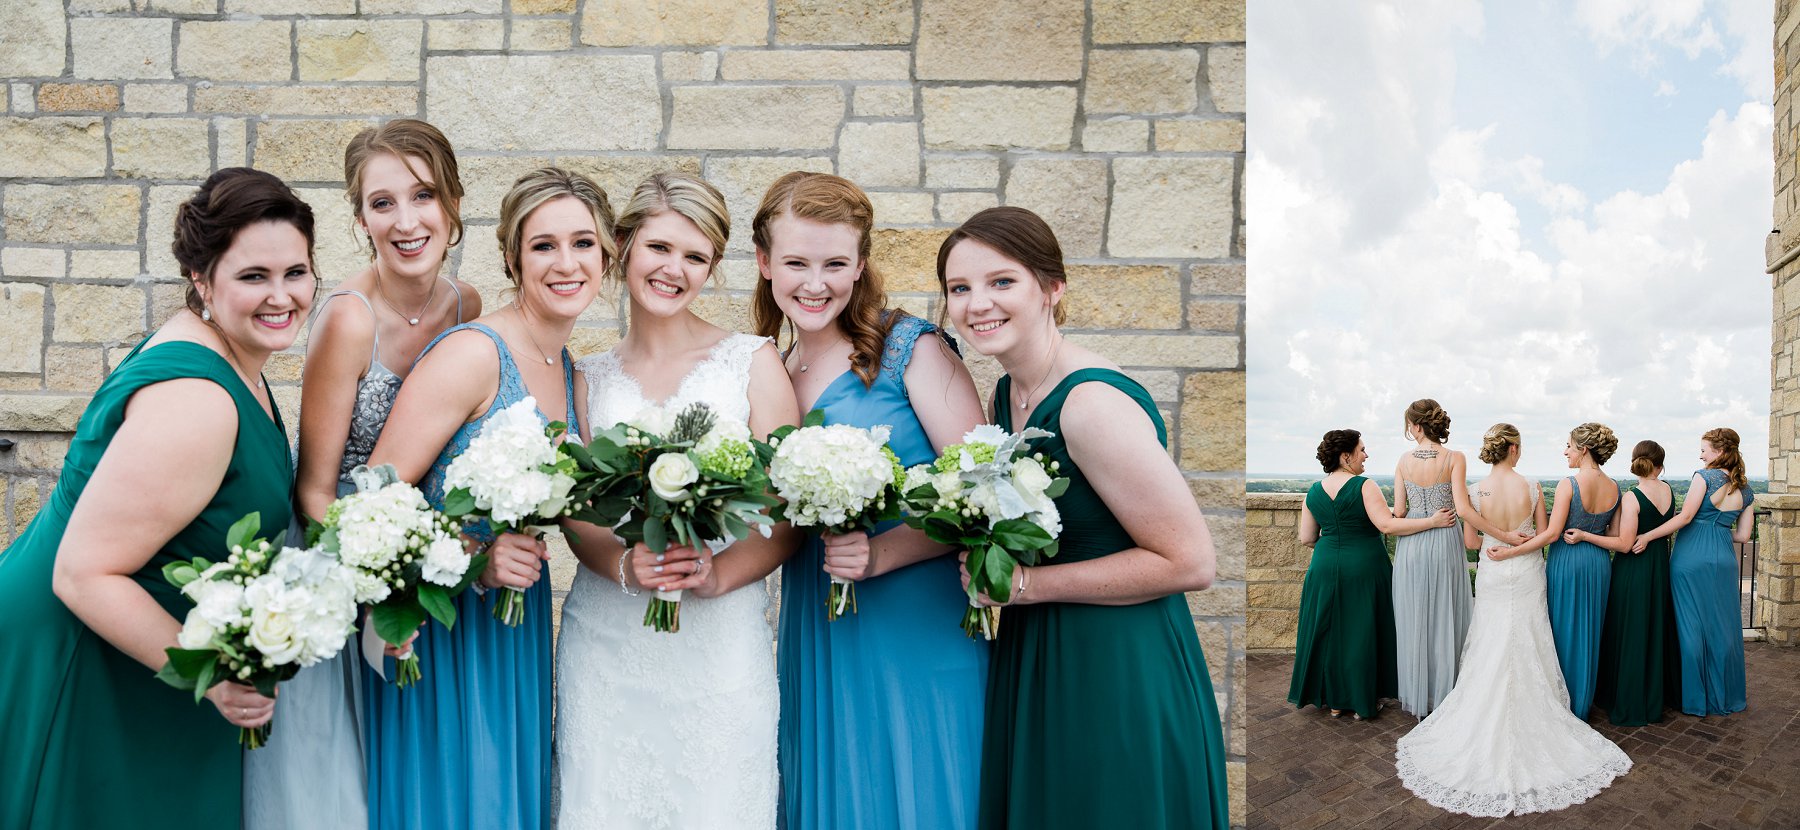 Lawrence Rooftop Terrace Wedding at The Oread by Merry Ohler